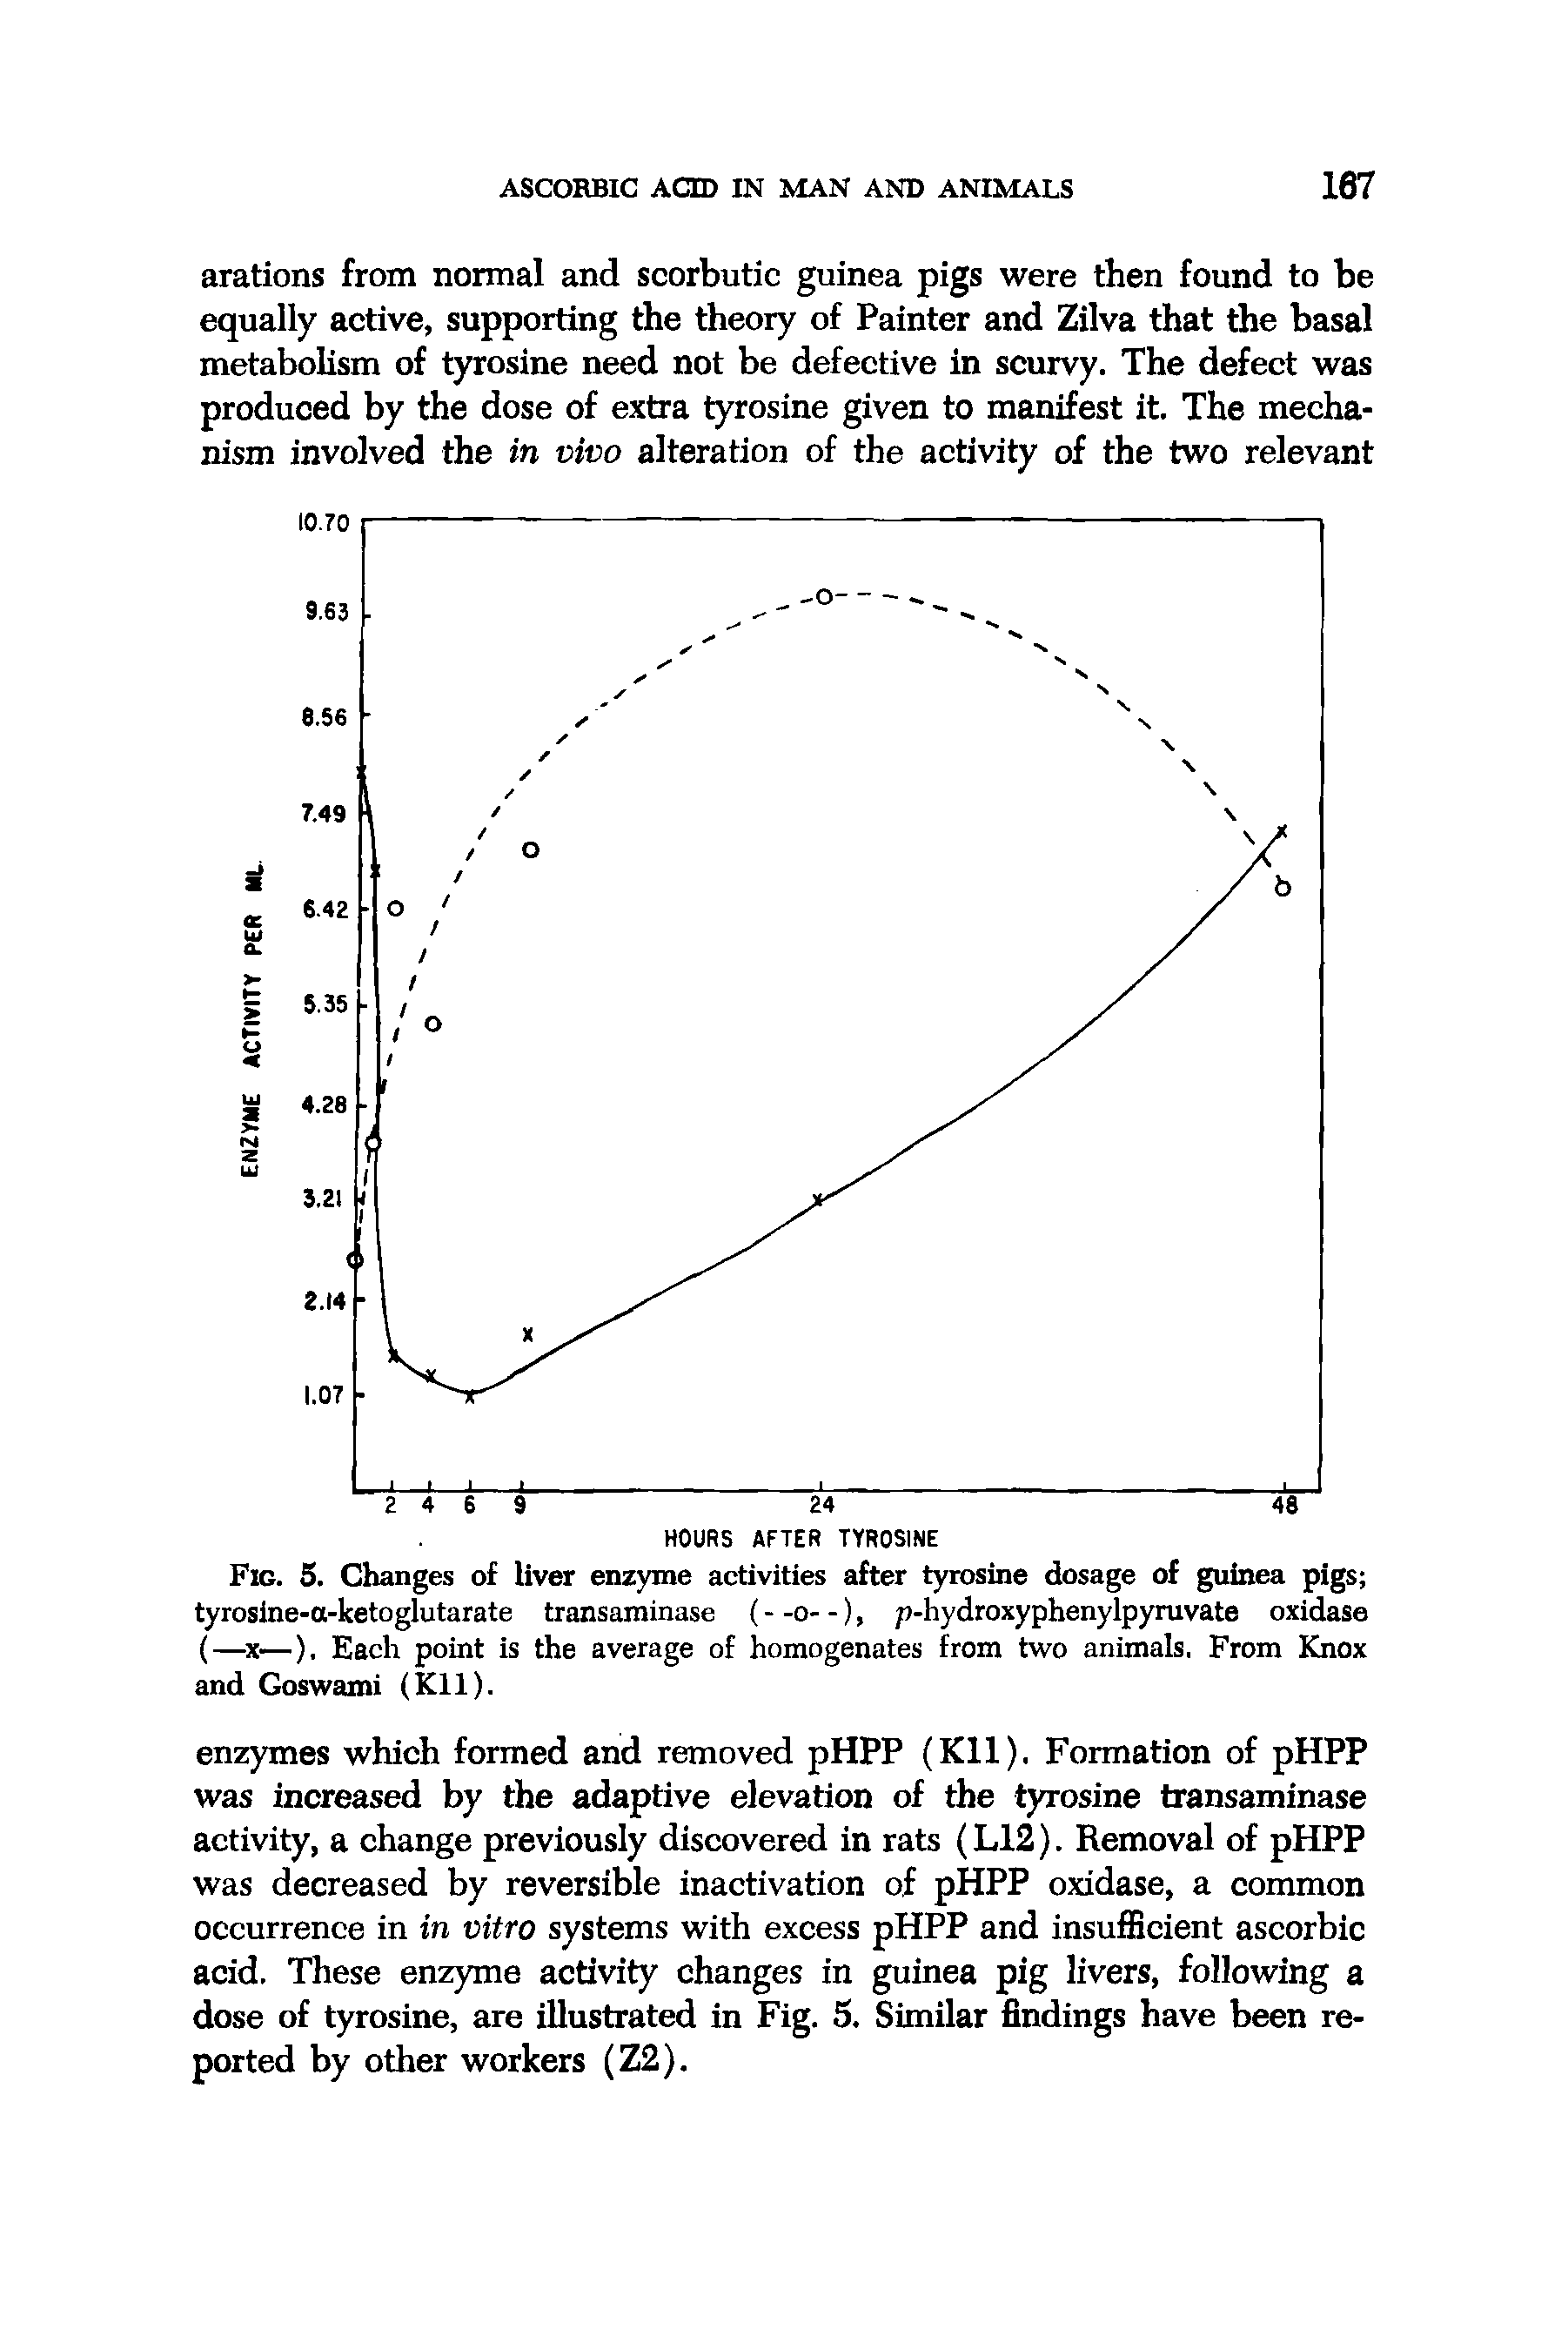 Fig. 5. Changes of liver enzyme activities after tyrosine dosage of guinea pigs tyrosine-a-ketoglutarate transaminase (- -o- -), p-hydroxyphenylpyruvate oxidase (— x—). Each point is the average of homogenates from two animals. From Knox and Goswami (Kll).